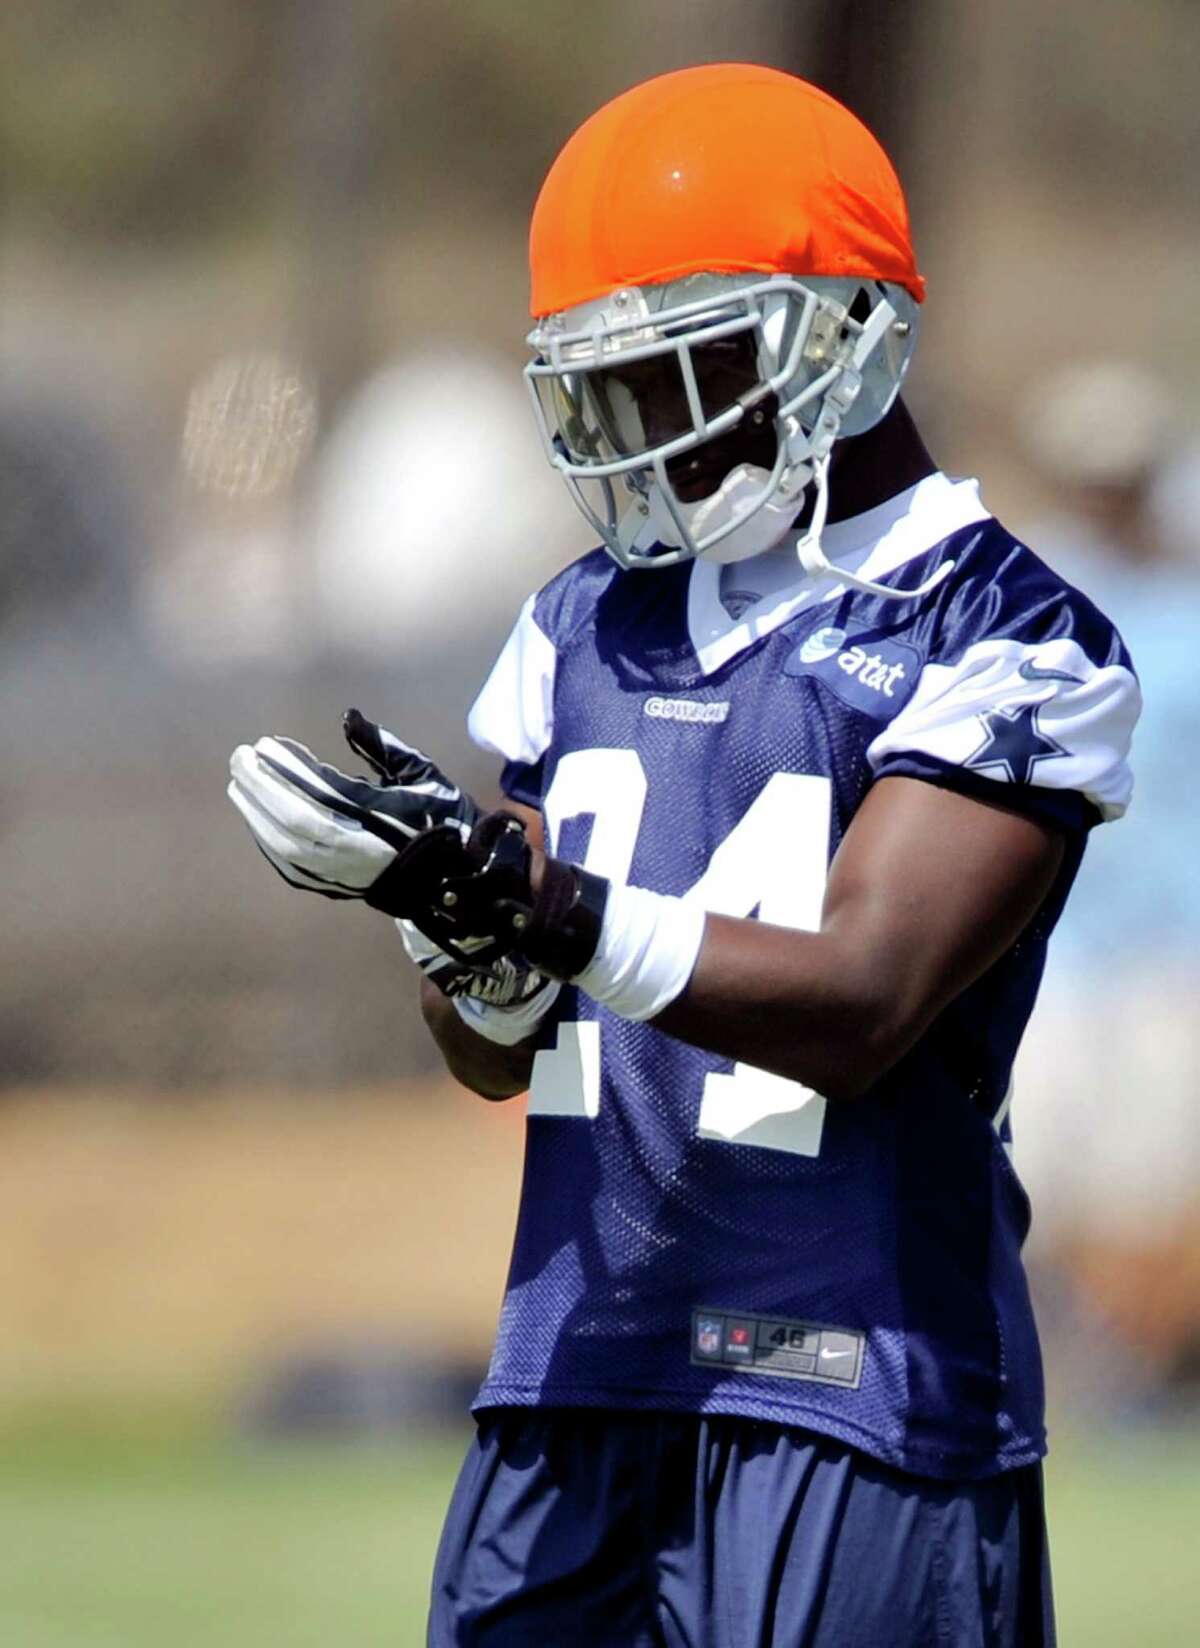 Dallas Cowboys cornerback Morris Claiborne checks his wristband before participating in a drill during NFL training camp, Tuesday, July 31, 2012, in Oxnard, Calif. (AP Photo/Gus Ruelas)